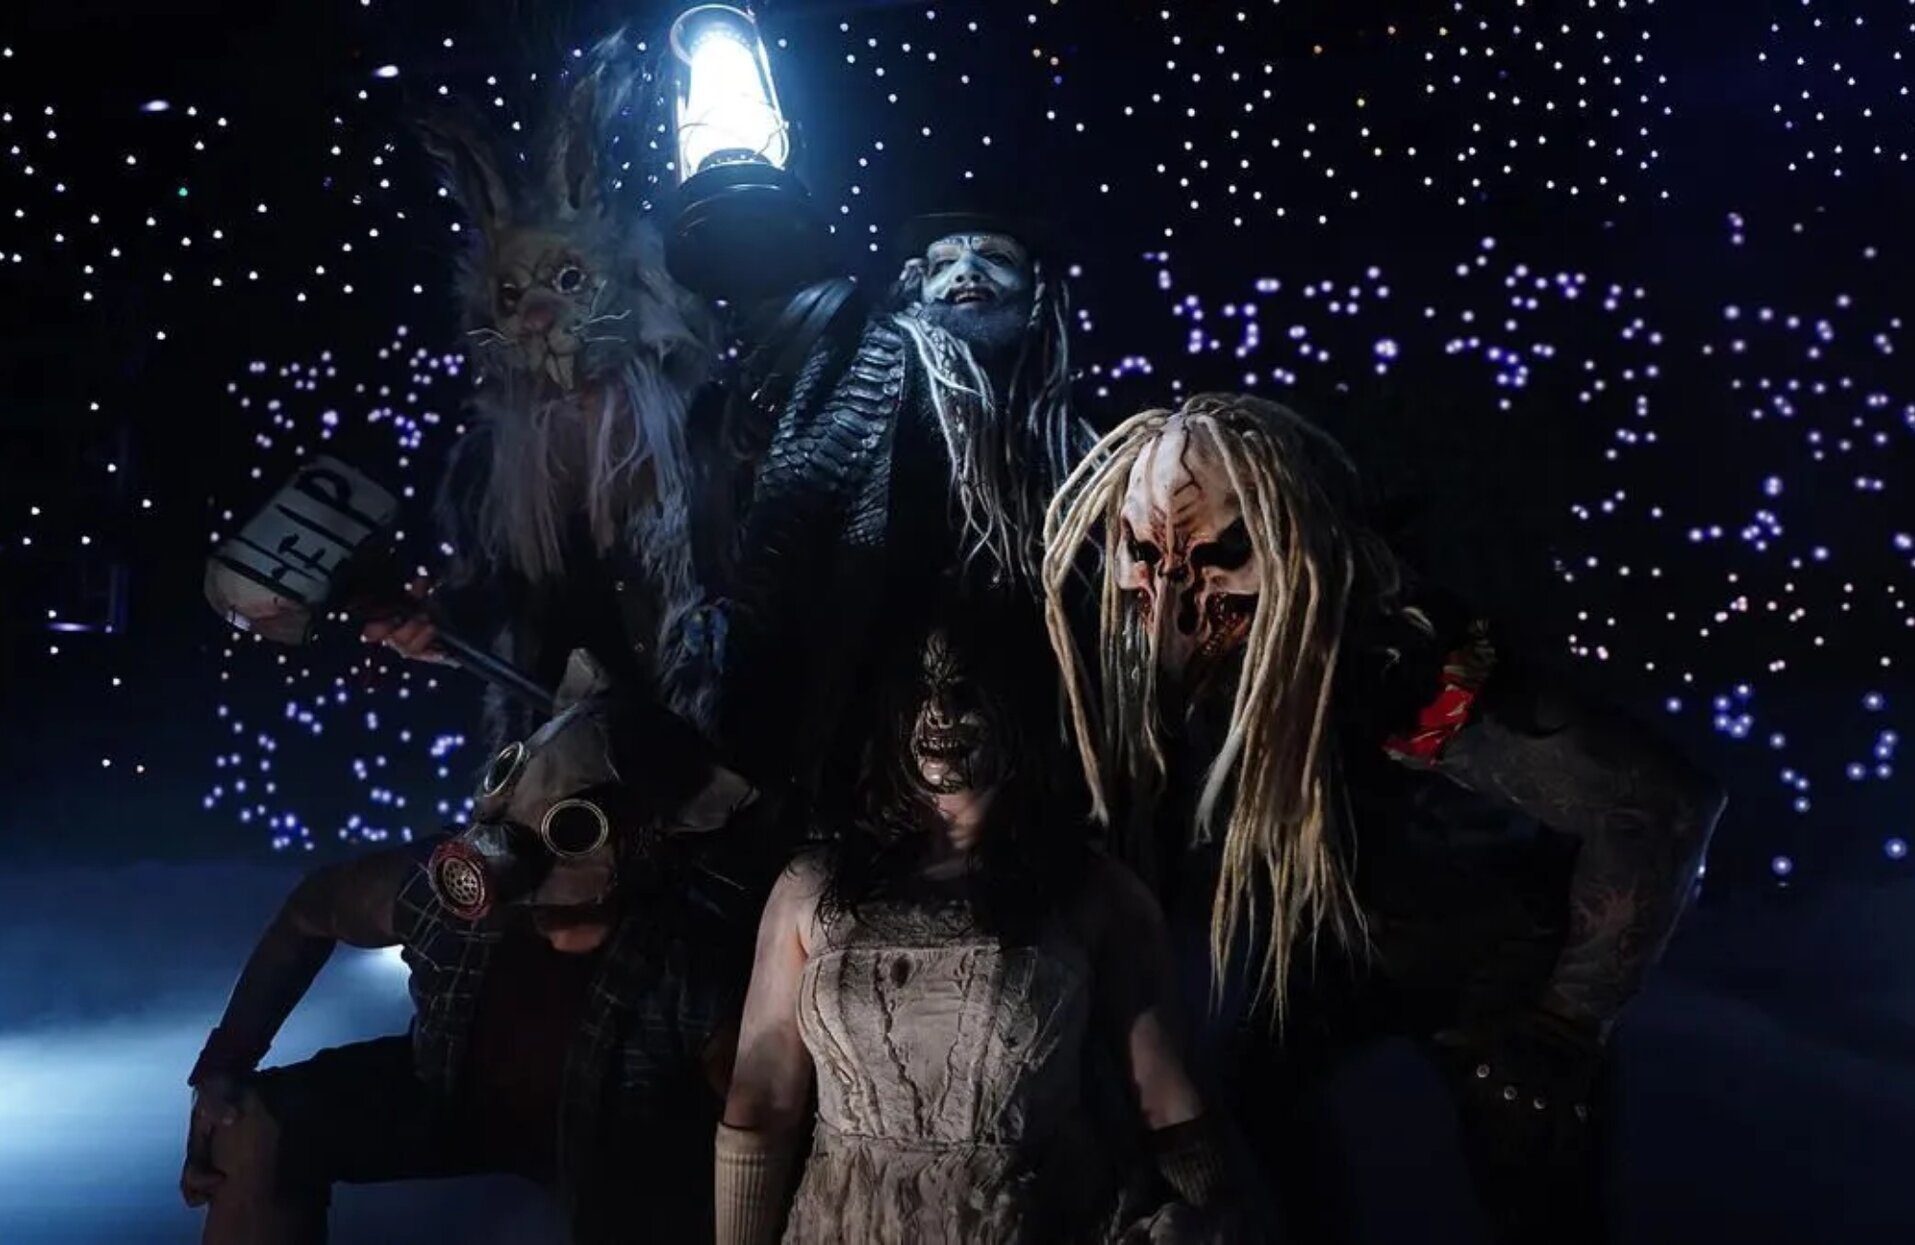 ⁠Will Uncle Howdy’s Wyatt 6 faction make an appearance at WWE SmackDown